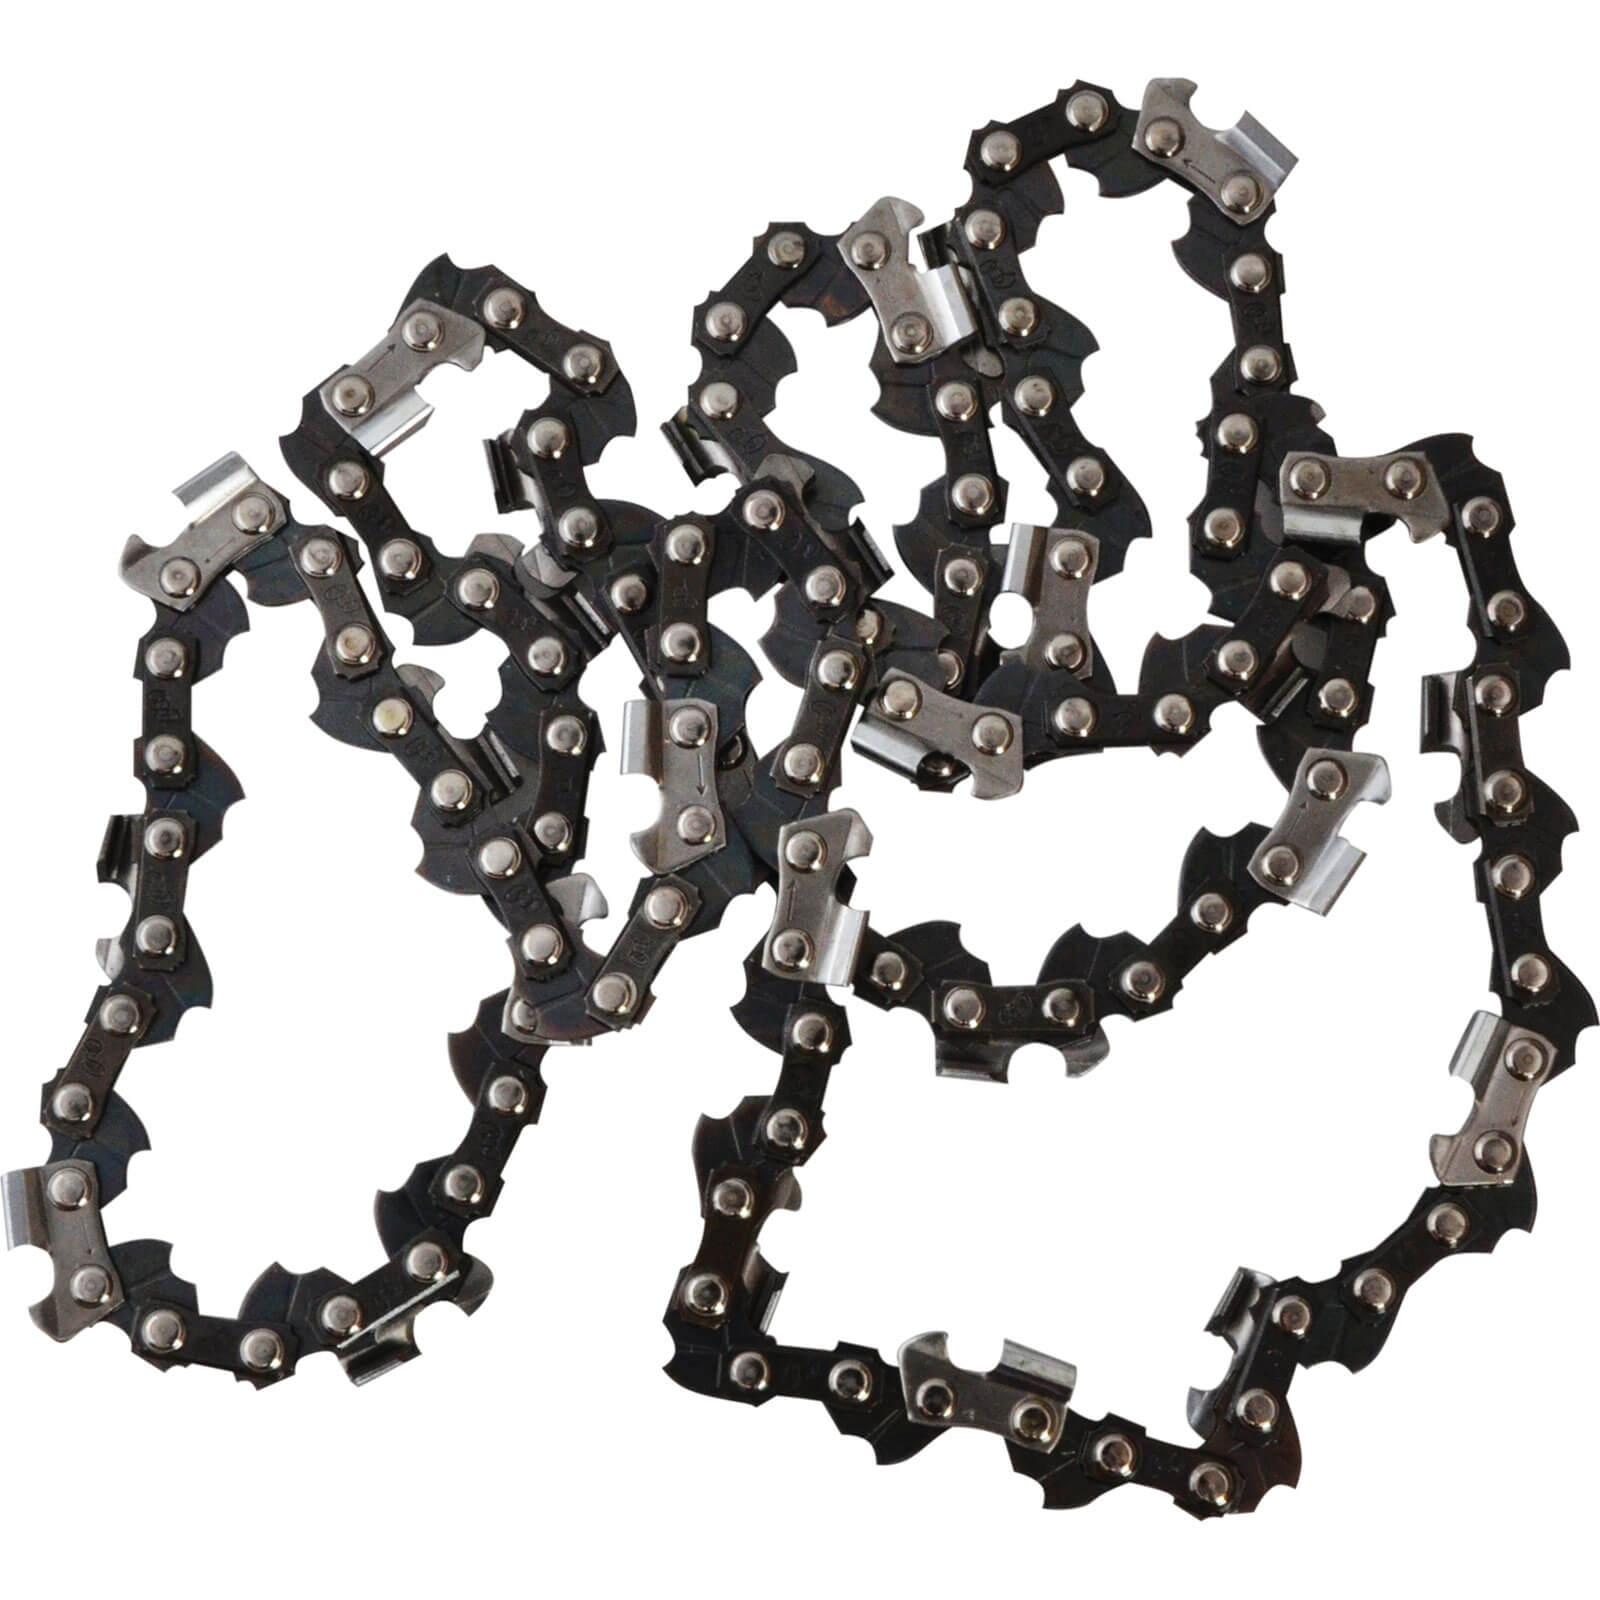 DeWalt Replacement Chain for DCMPS567 Pole Chainsaw 200mm